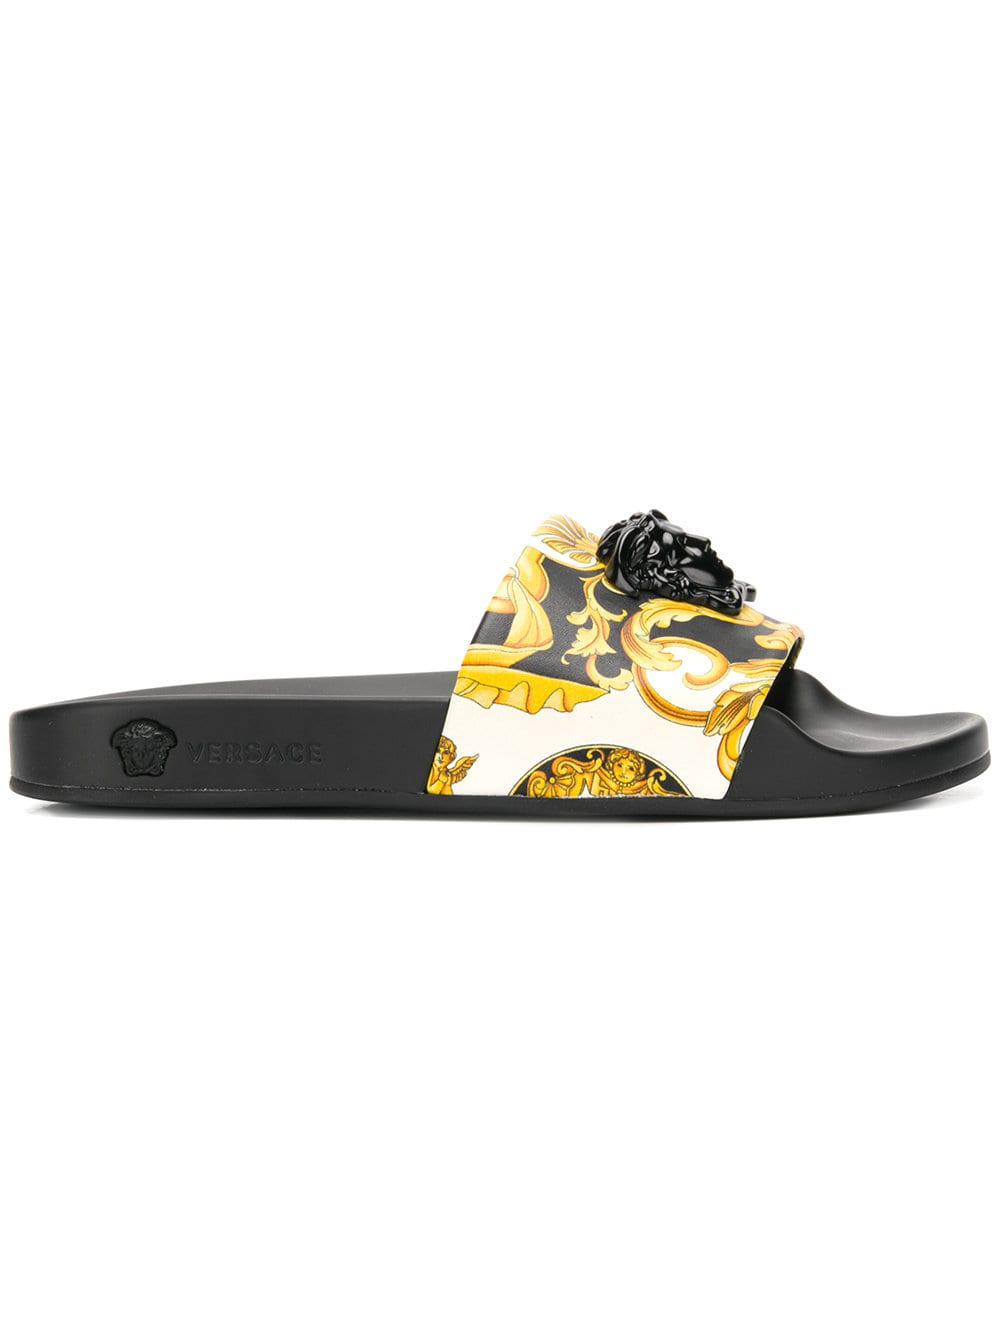 Versace Leather Signature Print Medusa Slides in Yellow - Lyst